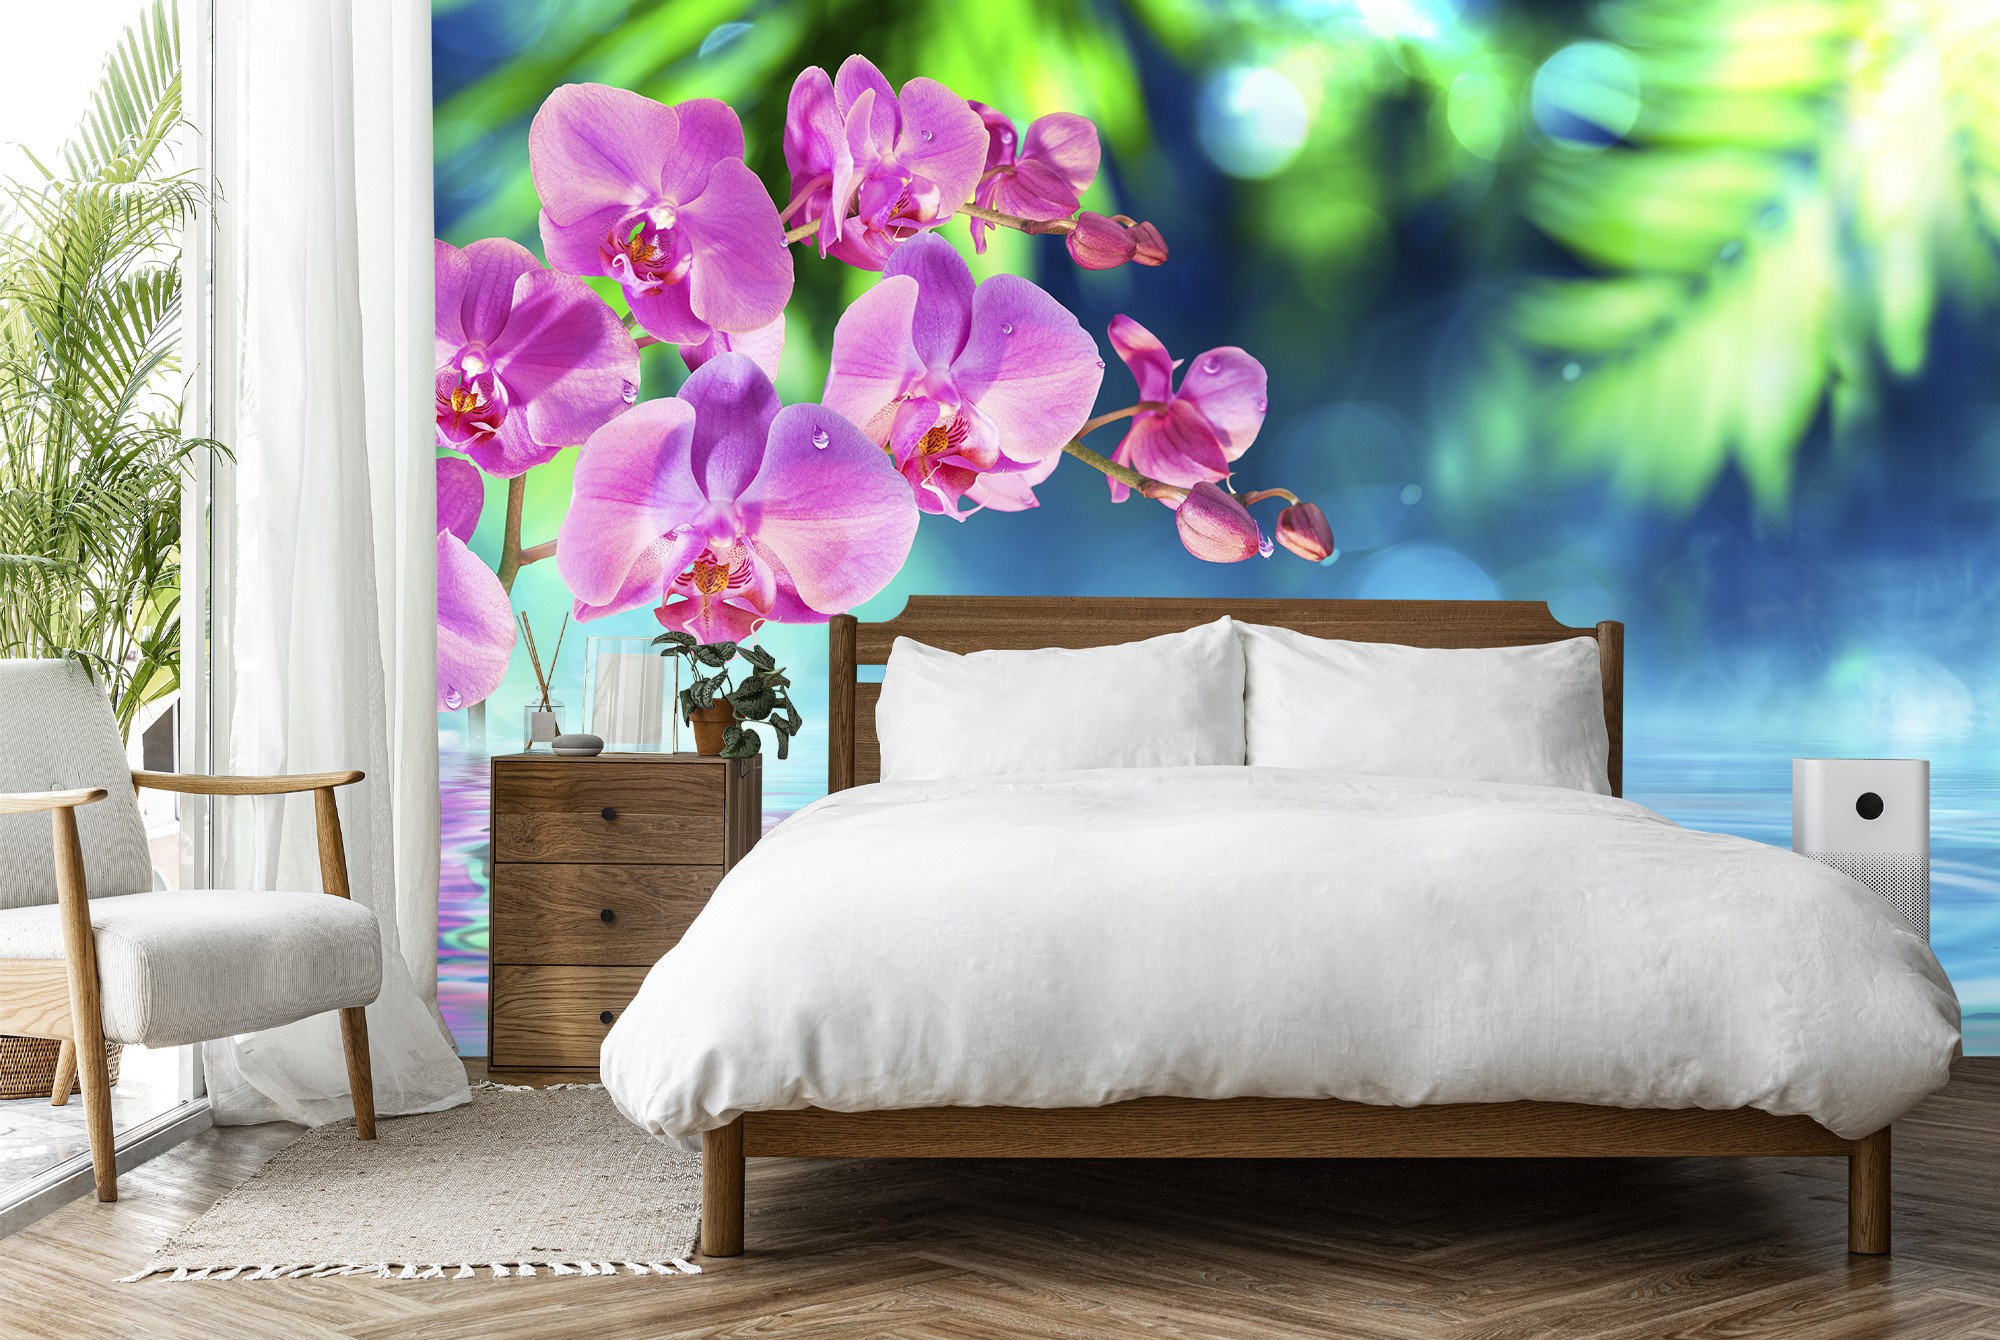 Pink Orchid Pond Wall Mural Wallpaper